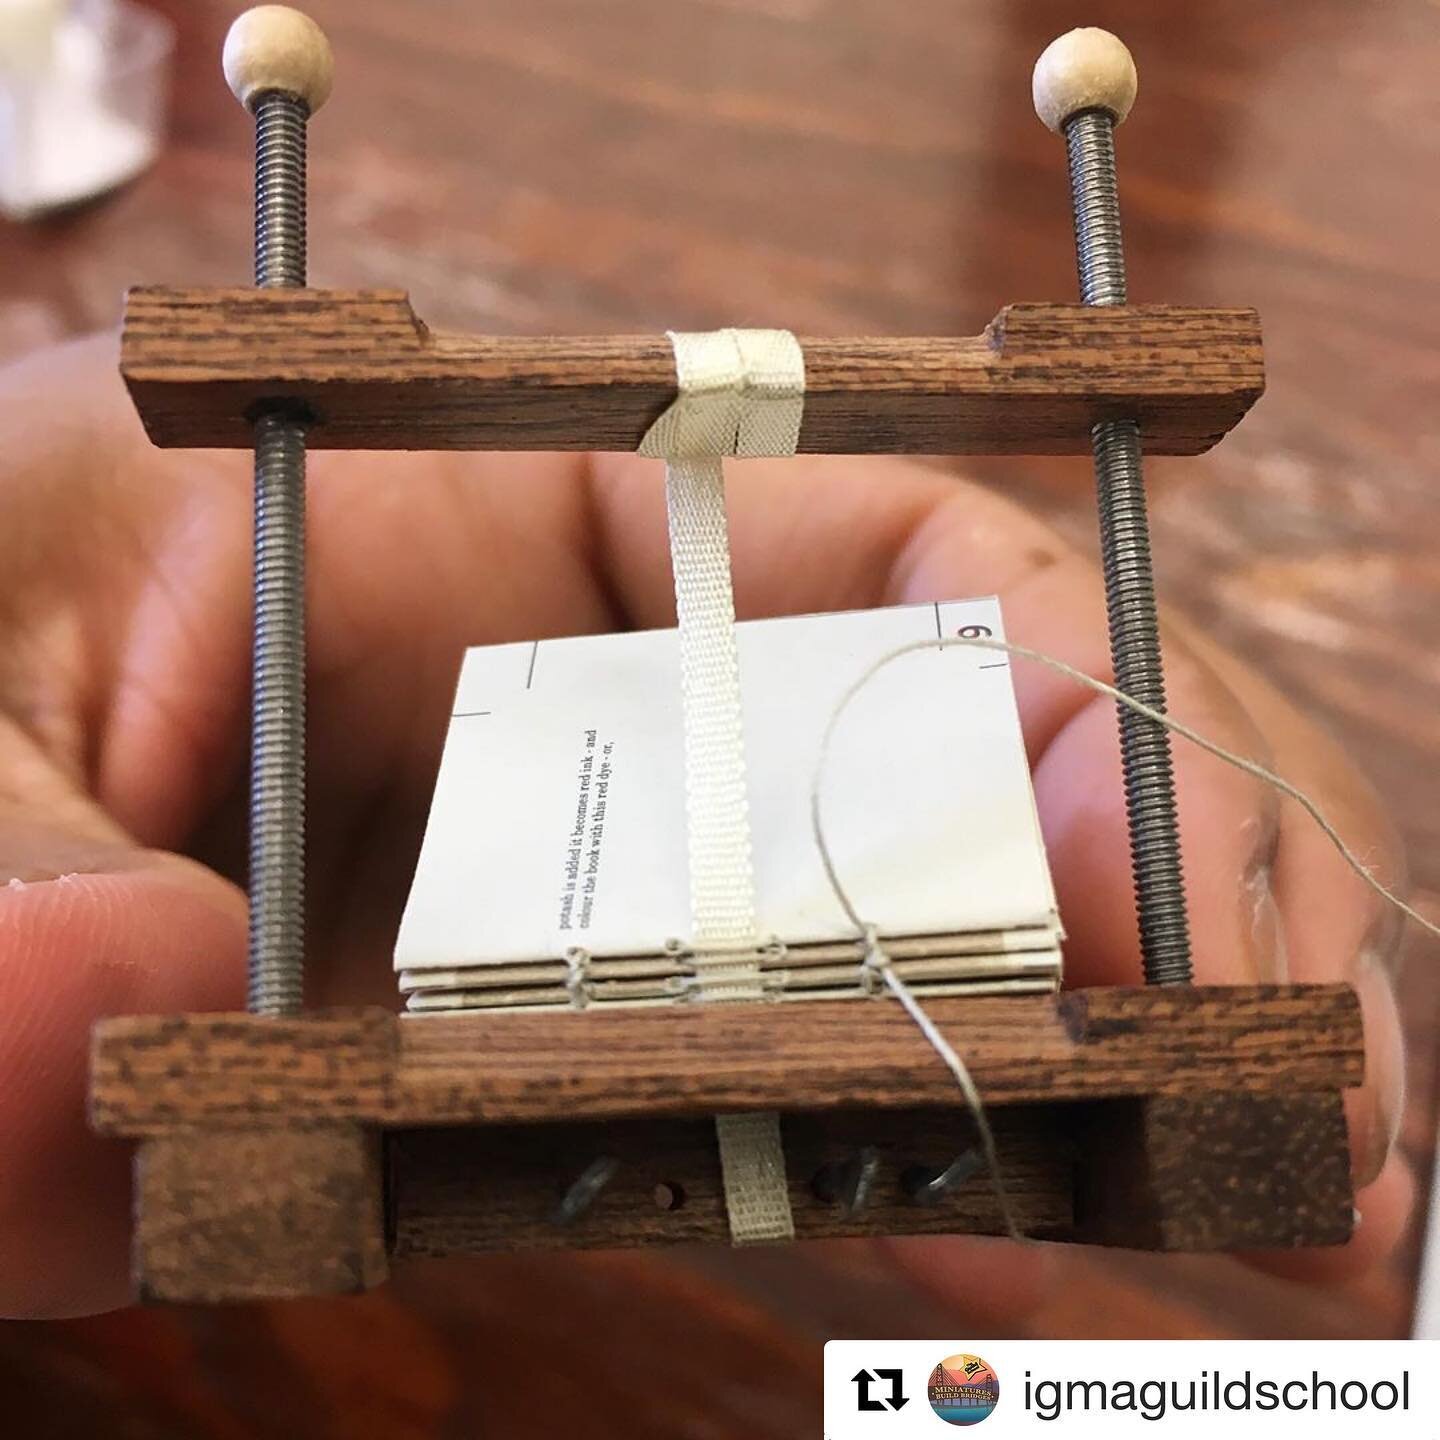 #Repost @igmaguildschool with @get_repost
・・・
Tine Krijnen is teaching &ldquo;Bookbinding and Gold/Silver Tooling&rdquo; this week. 📚 Here&rsquo;s a work-in-progress shot from @petite.afrique. ✍️ #tinytuesday